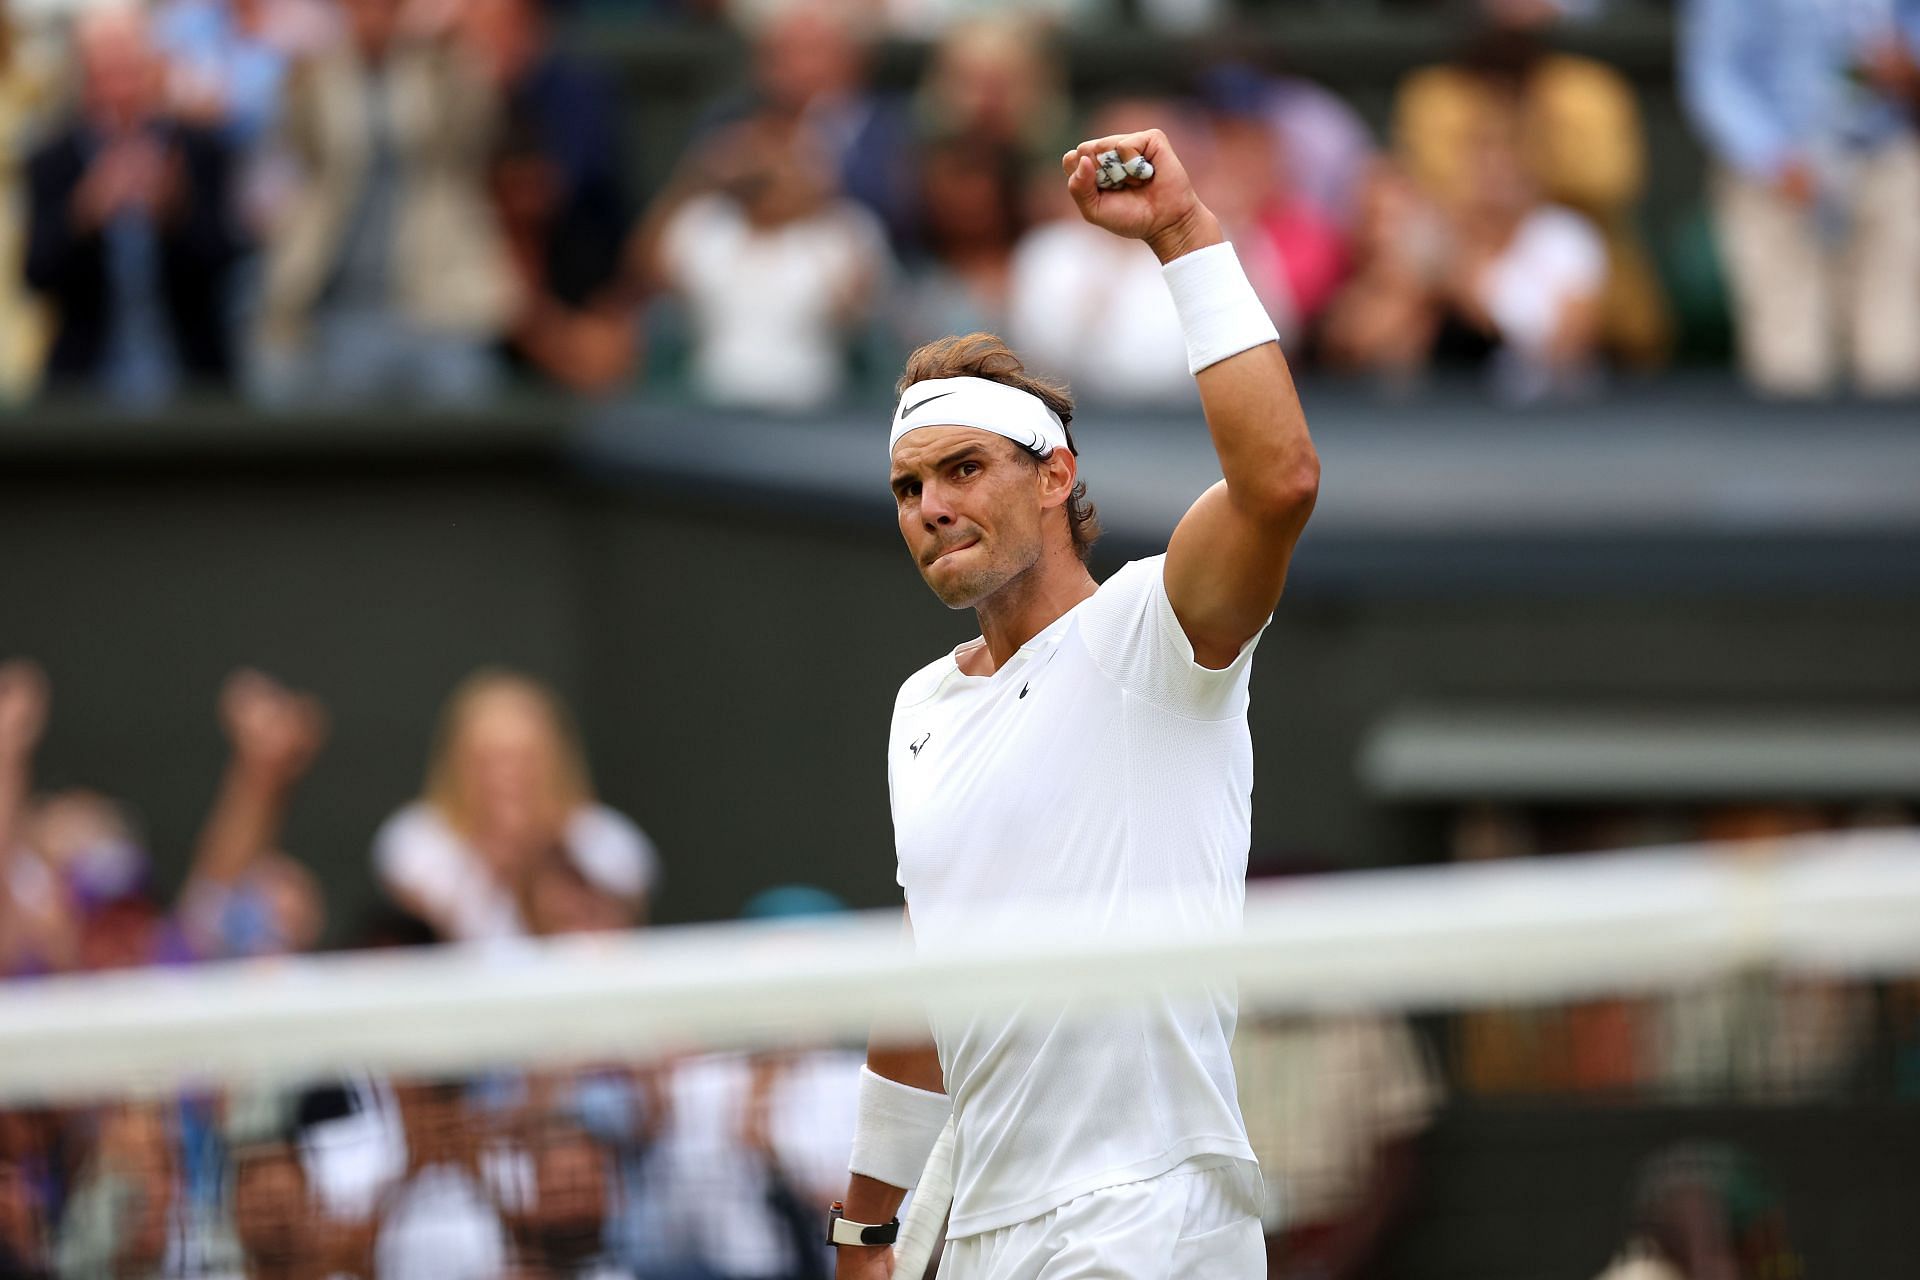 Rafael Nadal is into the semifinals of Wimbledon 2022